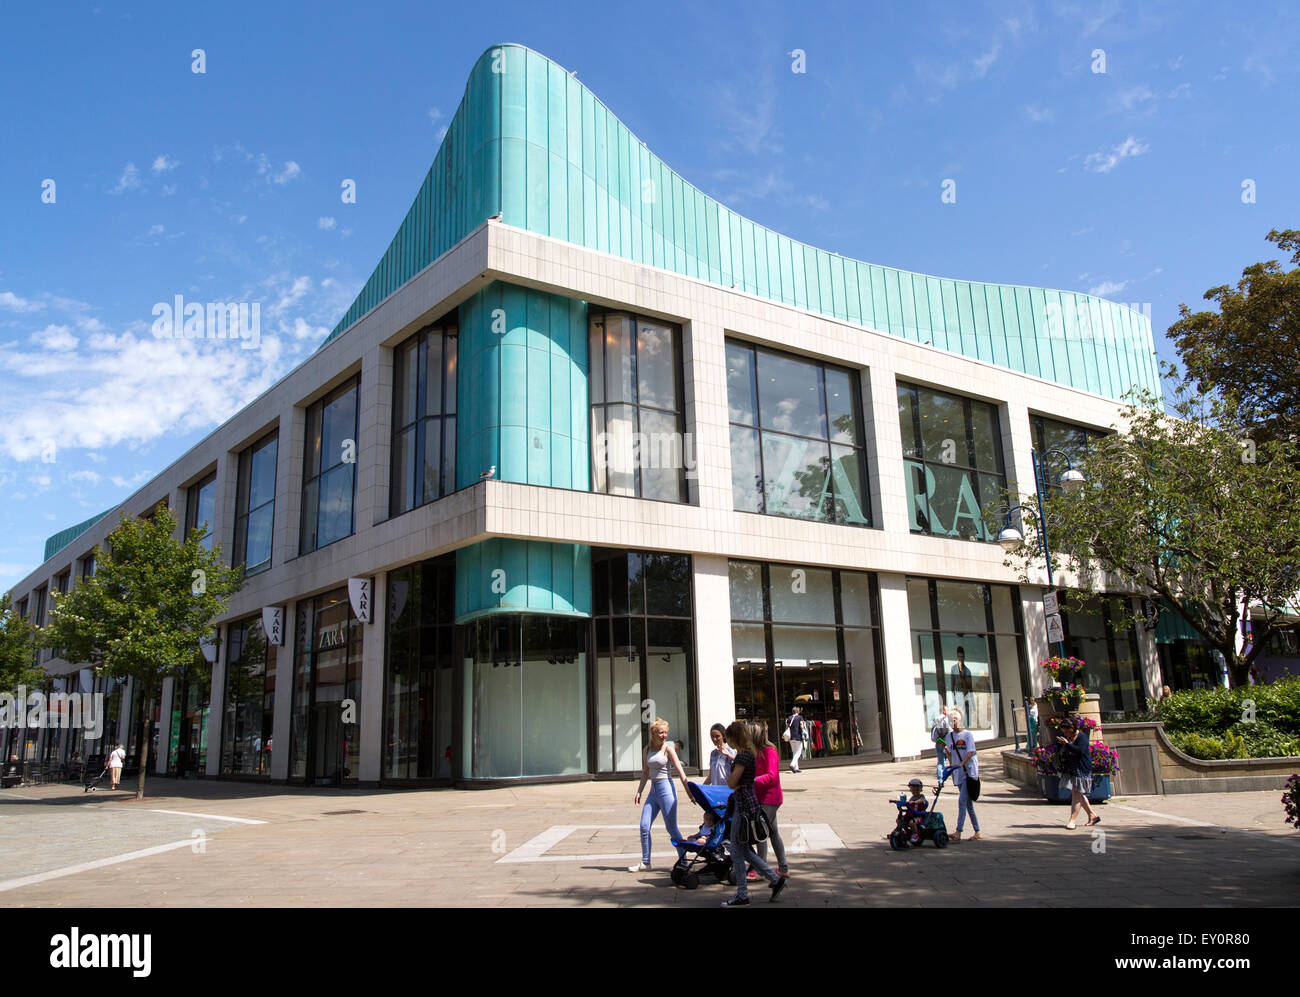 Zara store in central pedestrianised shopping area, Swansea, West  Glamorgan, South Wales, UK Stock Photo - Alamy